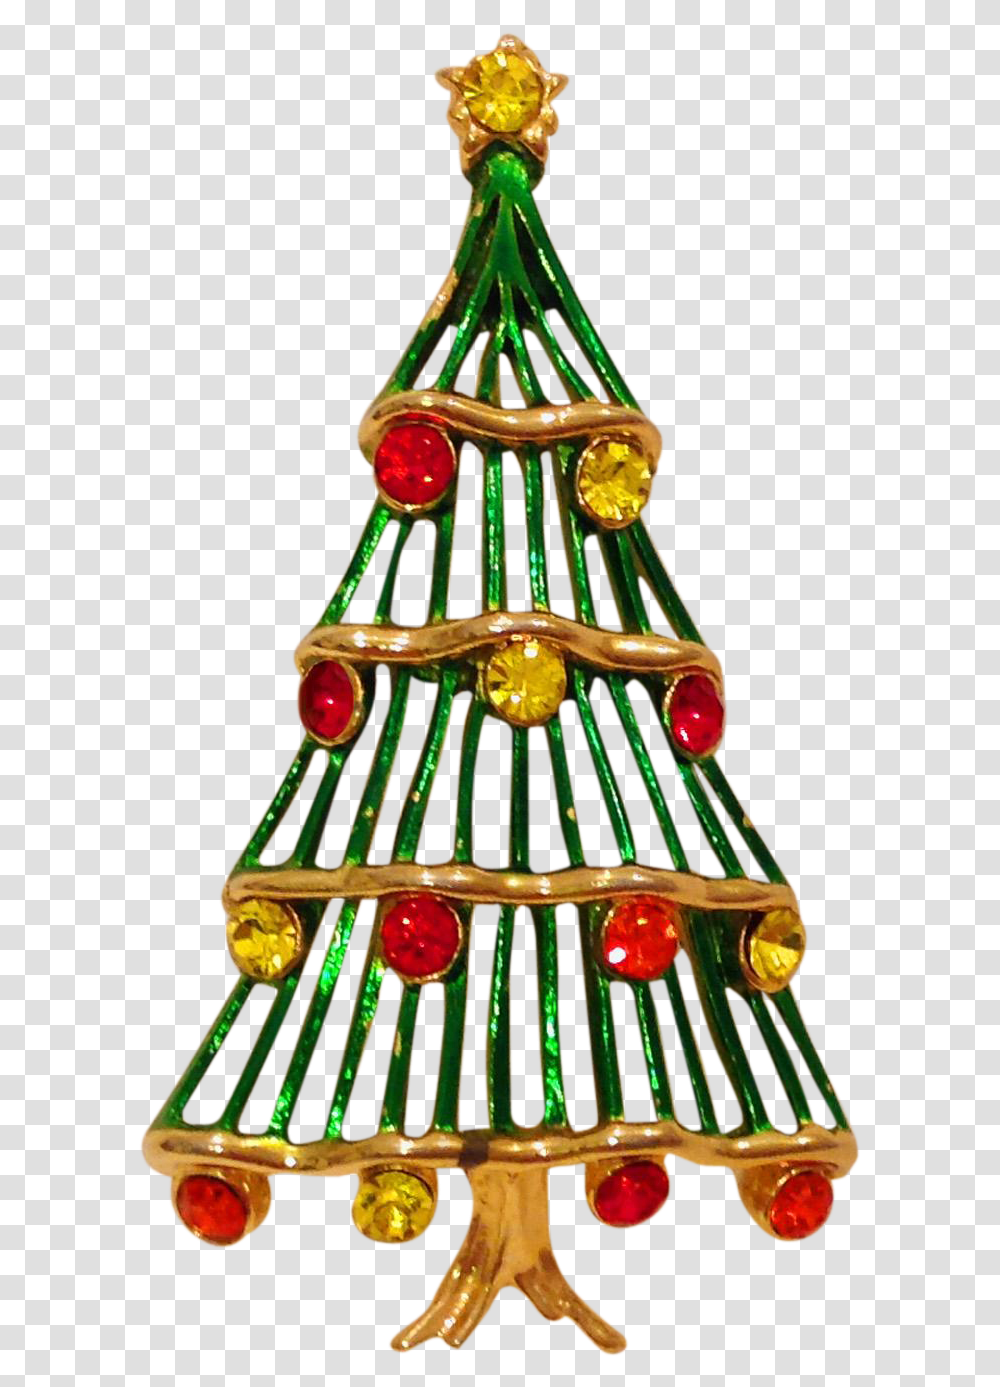 Vintage Christmas Tree Pins Lovely Christmas Tree Pin Christmas Tree, Plant, Ornament, Fir Transparent Png